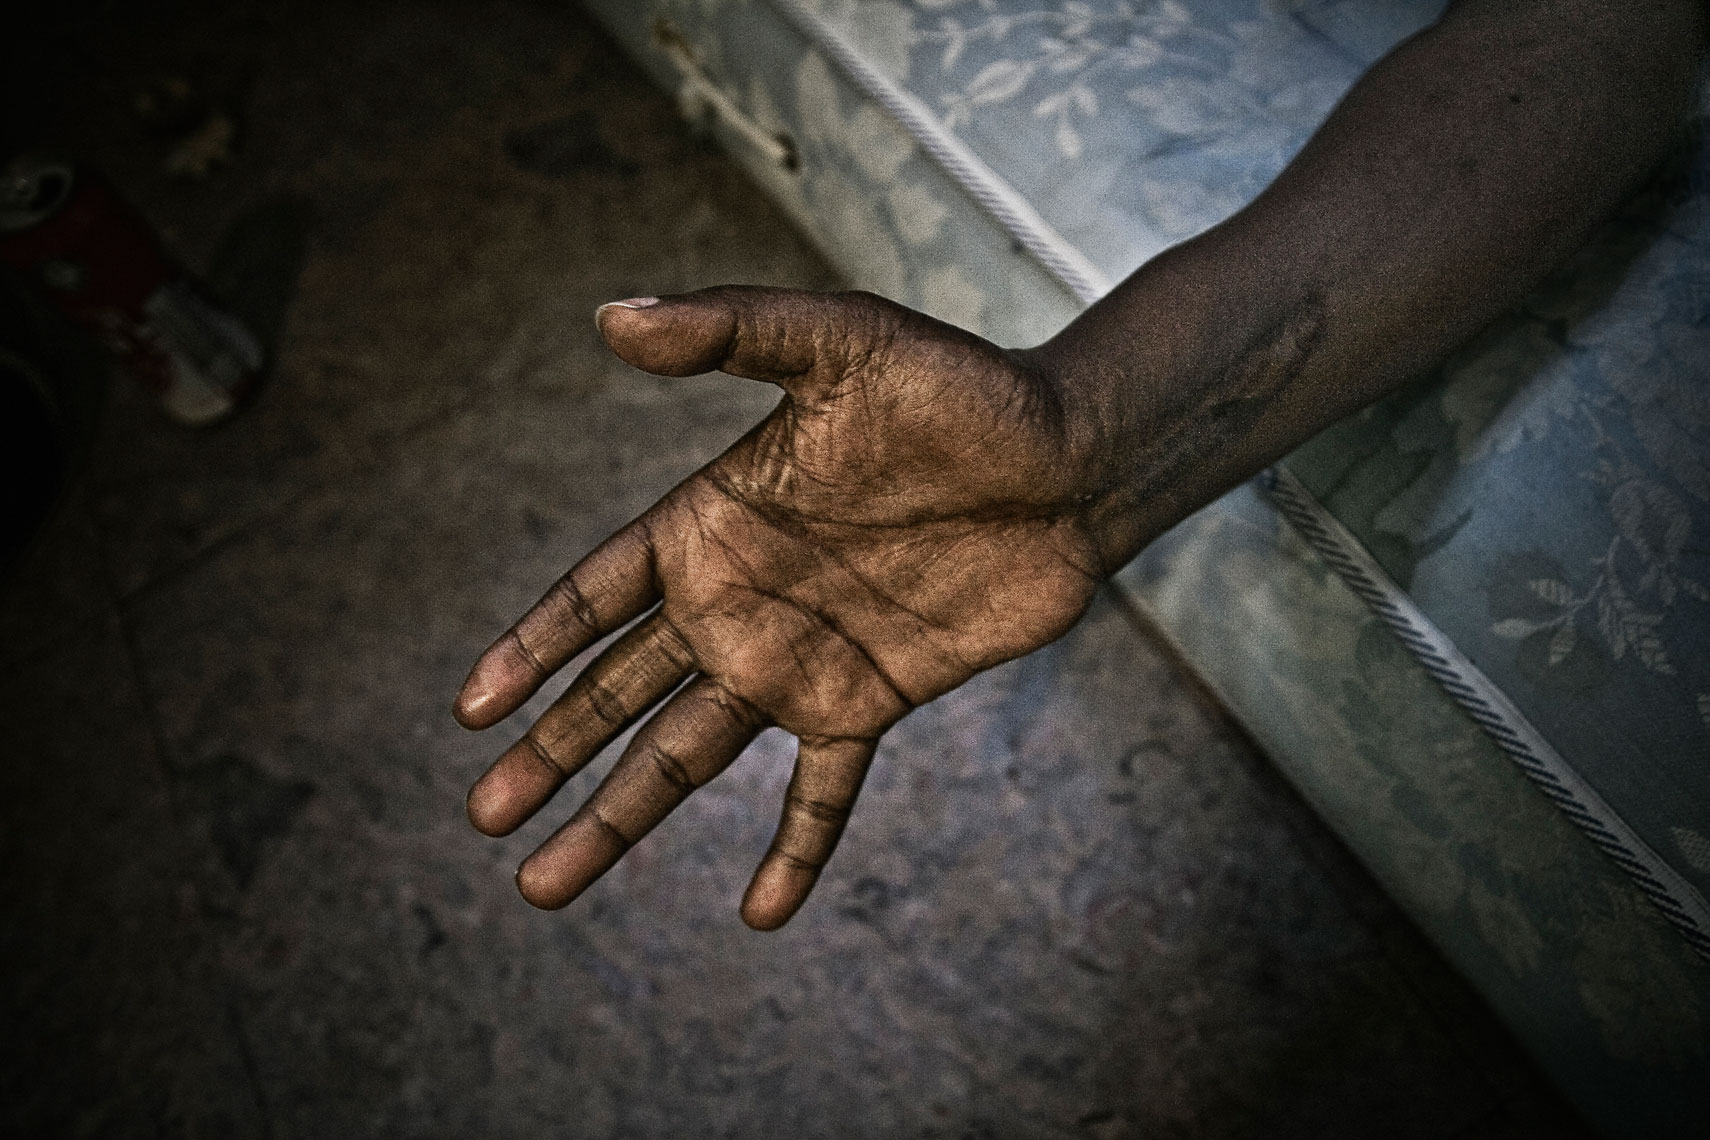 ITALY. Florence, 20th June 2011. The hand of a Somali refugee. He had an accident when he was working like a forklift truck operator. After surgery he remained not able to tighten his hand and consequently not able to work. Nowadays he received a life annuity from the Italian state.